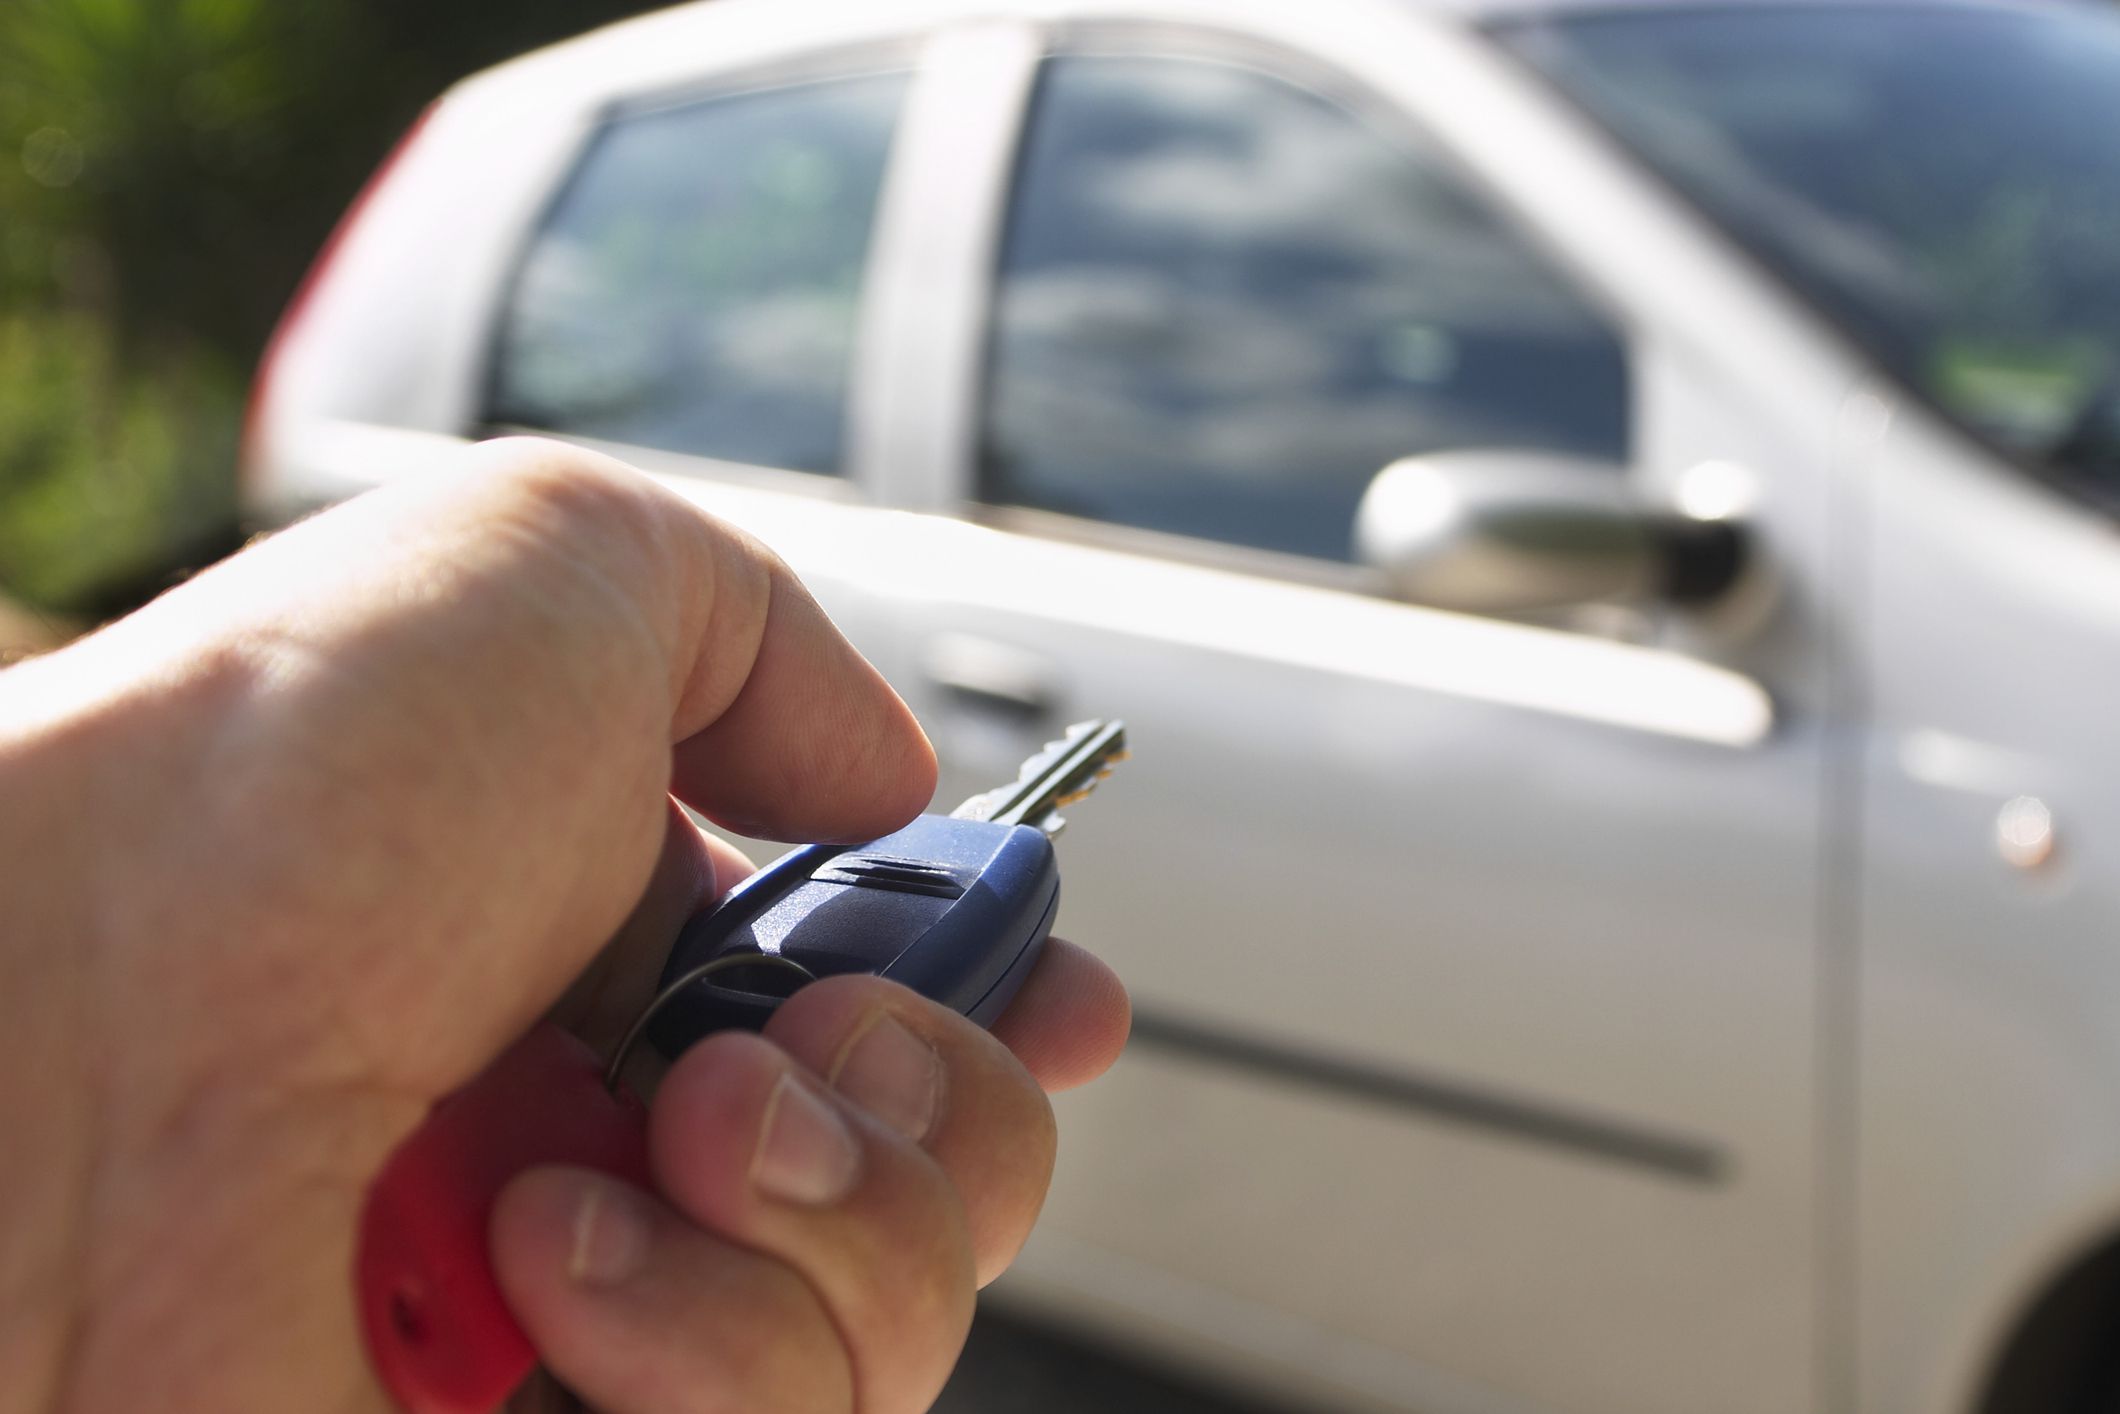 Can I Detect My Car's Keyless Remote If I Don't Know Where It Is? |  alum.mit.edu